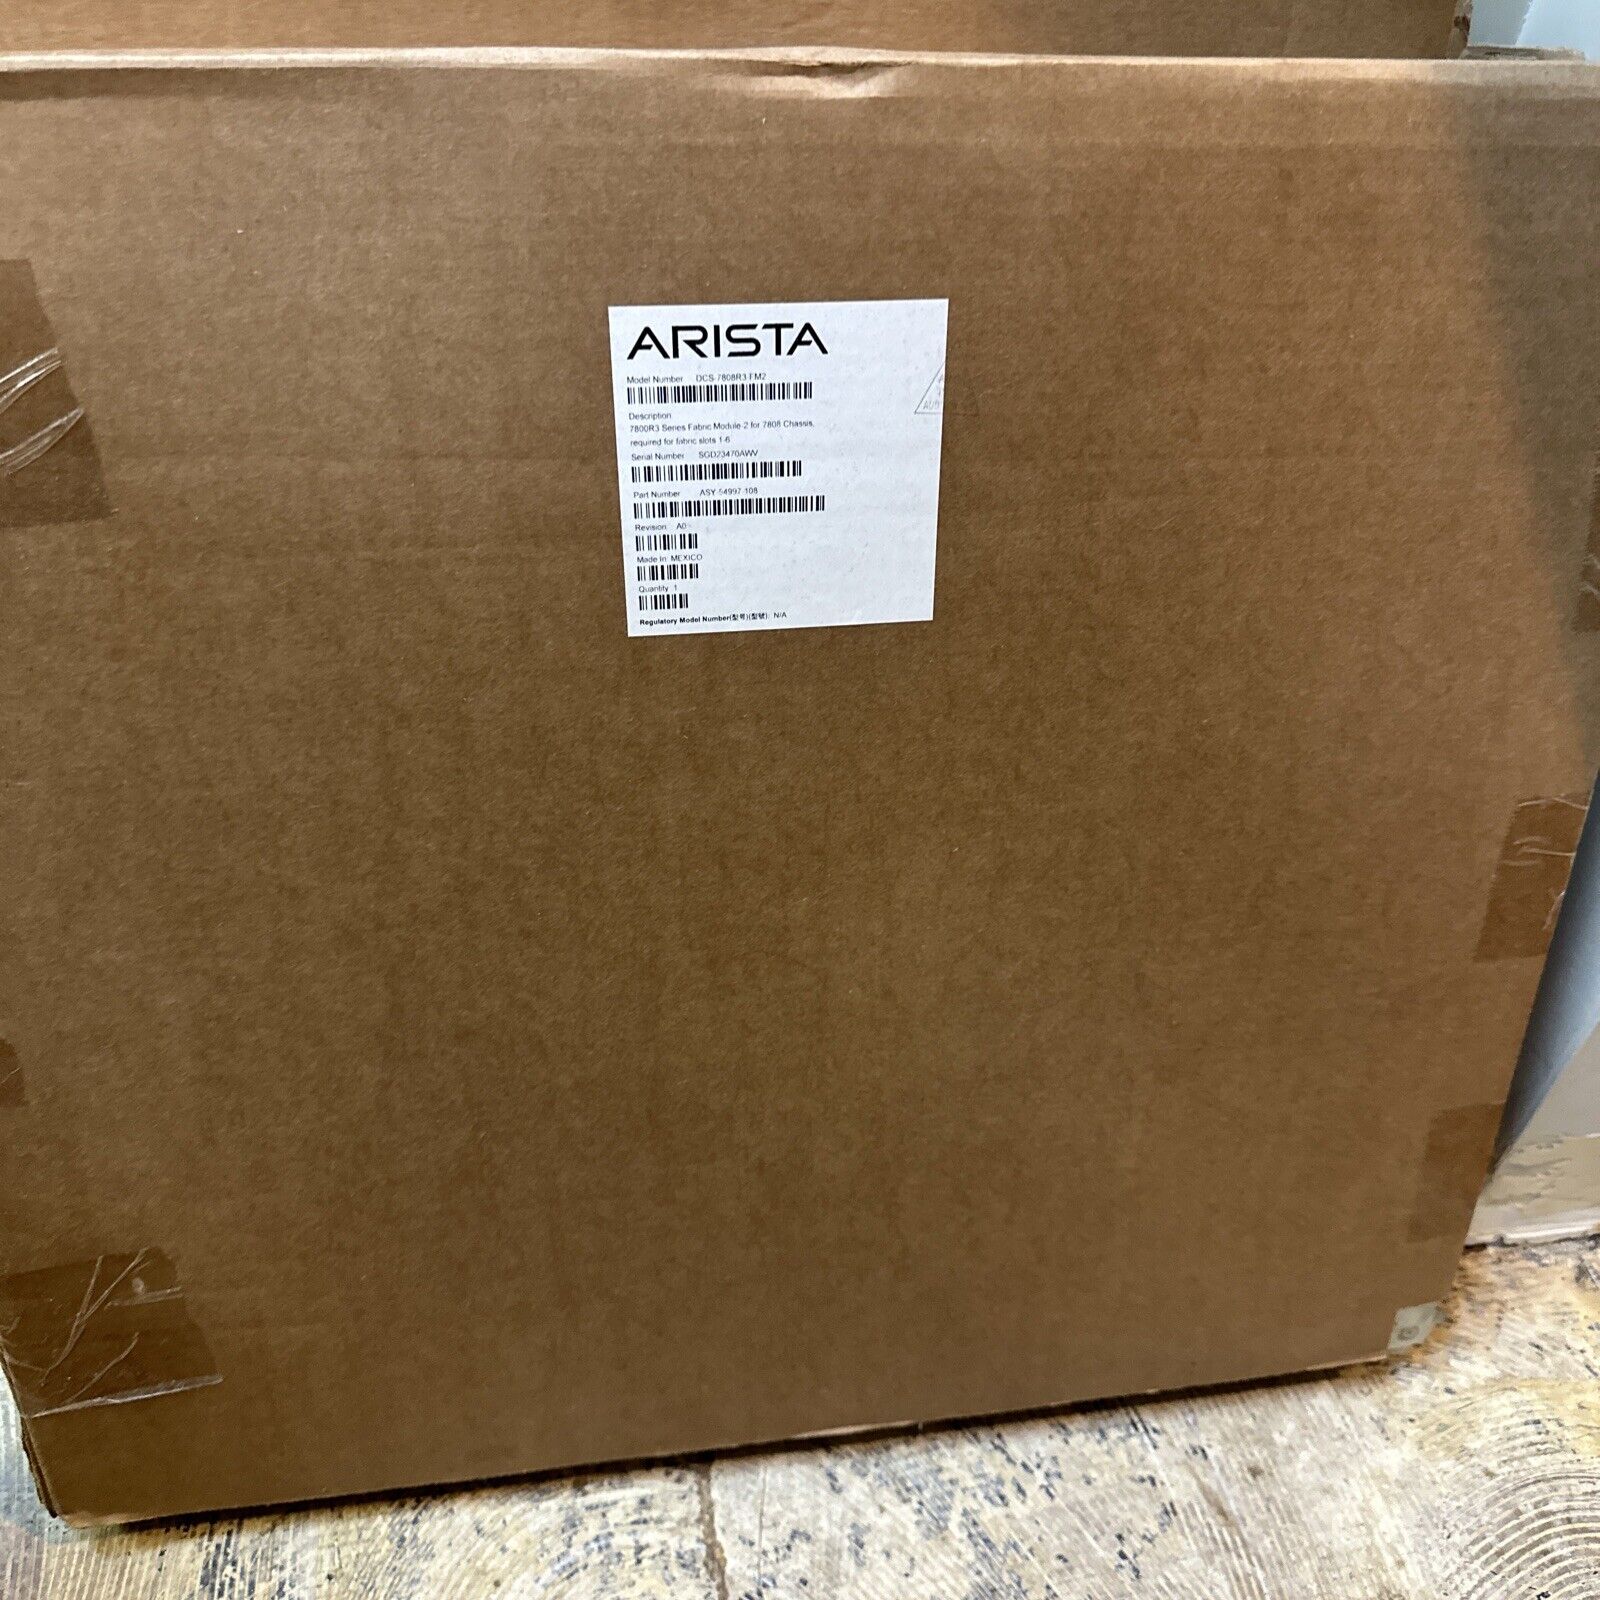 Arista 7808R3-FM2 ASY-54997-105 7800R3 Series Fabric Module for for 7808 New